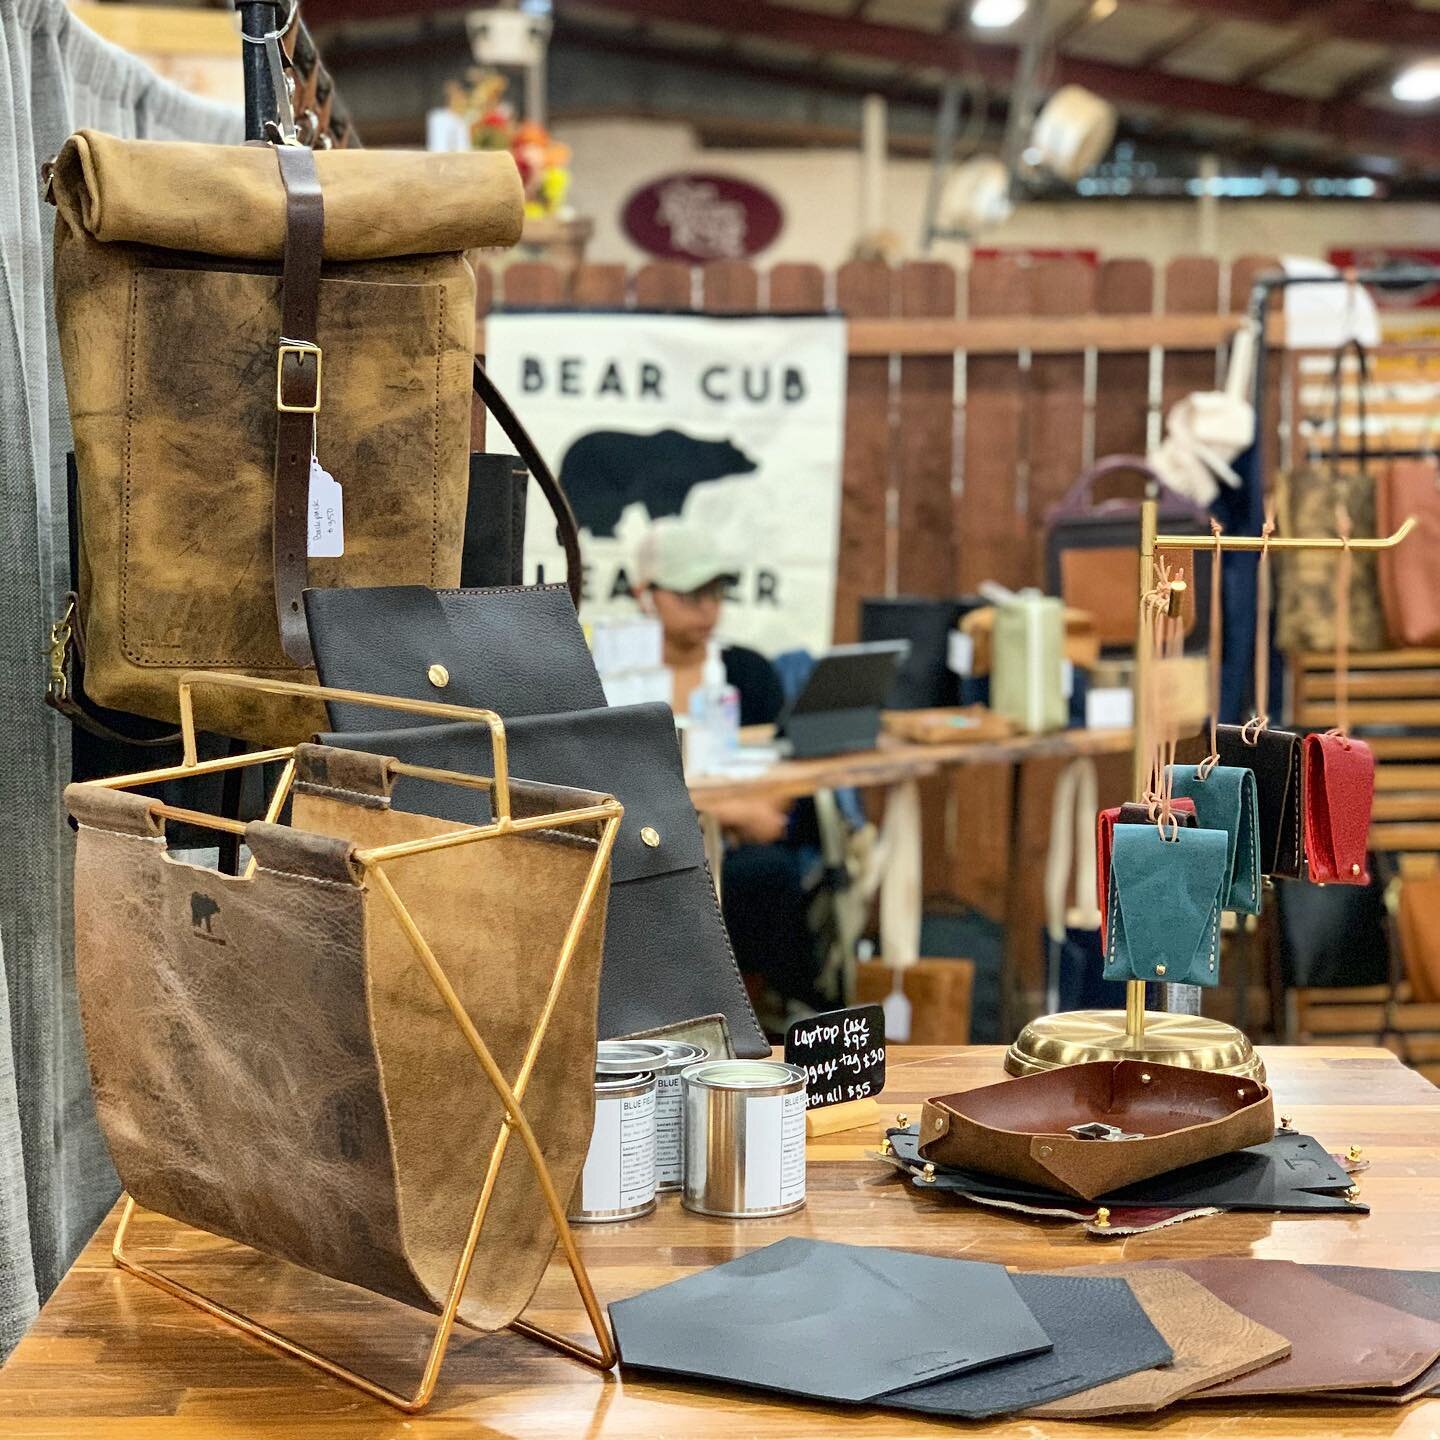 Back in the game! Here we are set up ready to sling some leather goodness! If you are in the #sanantonio area hit come on thru! #madeintexas #bearcubleather #carreythebear